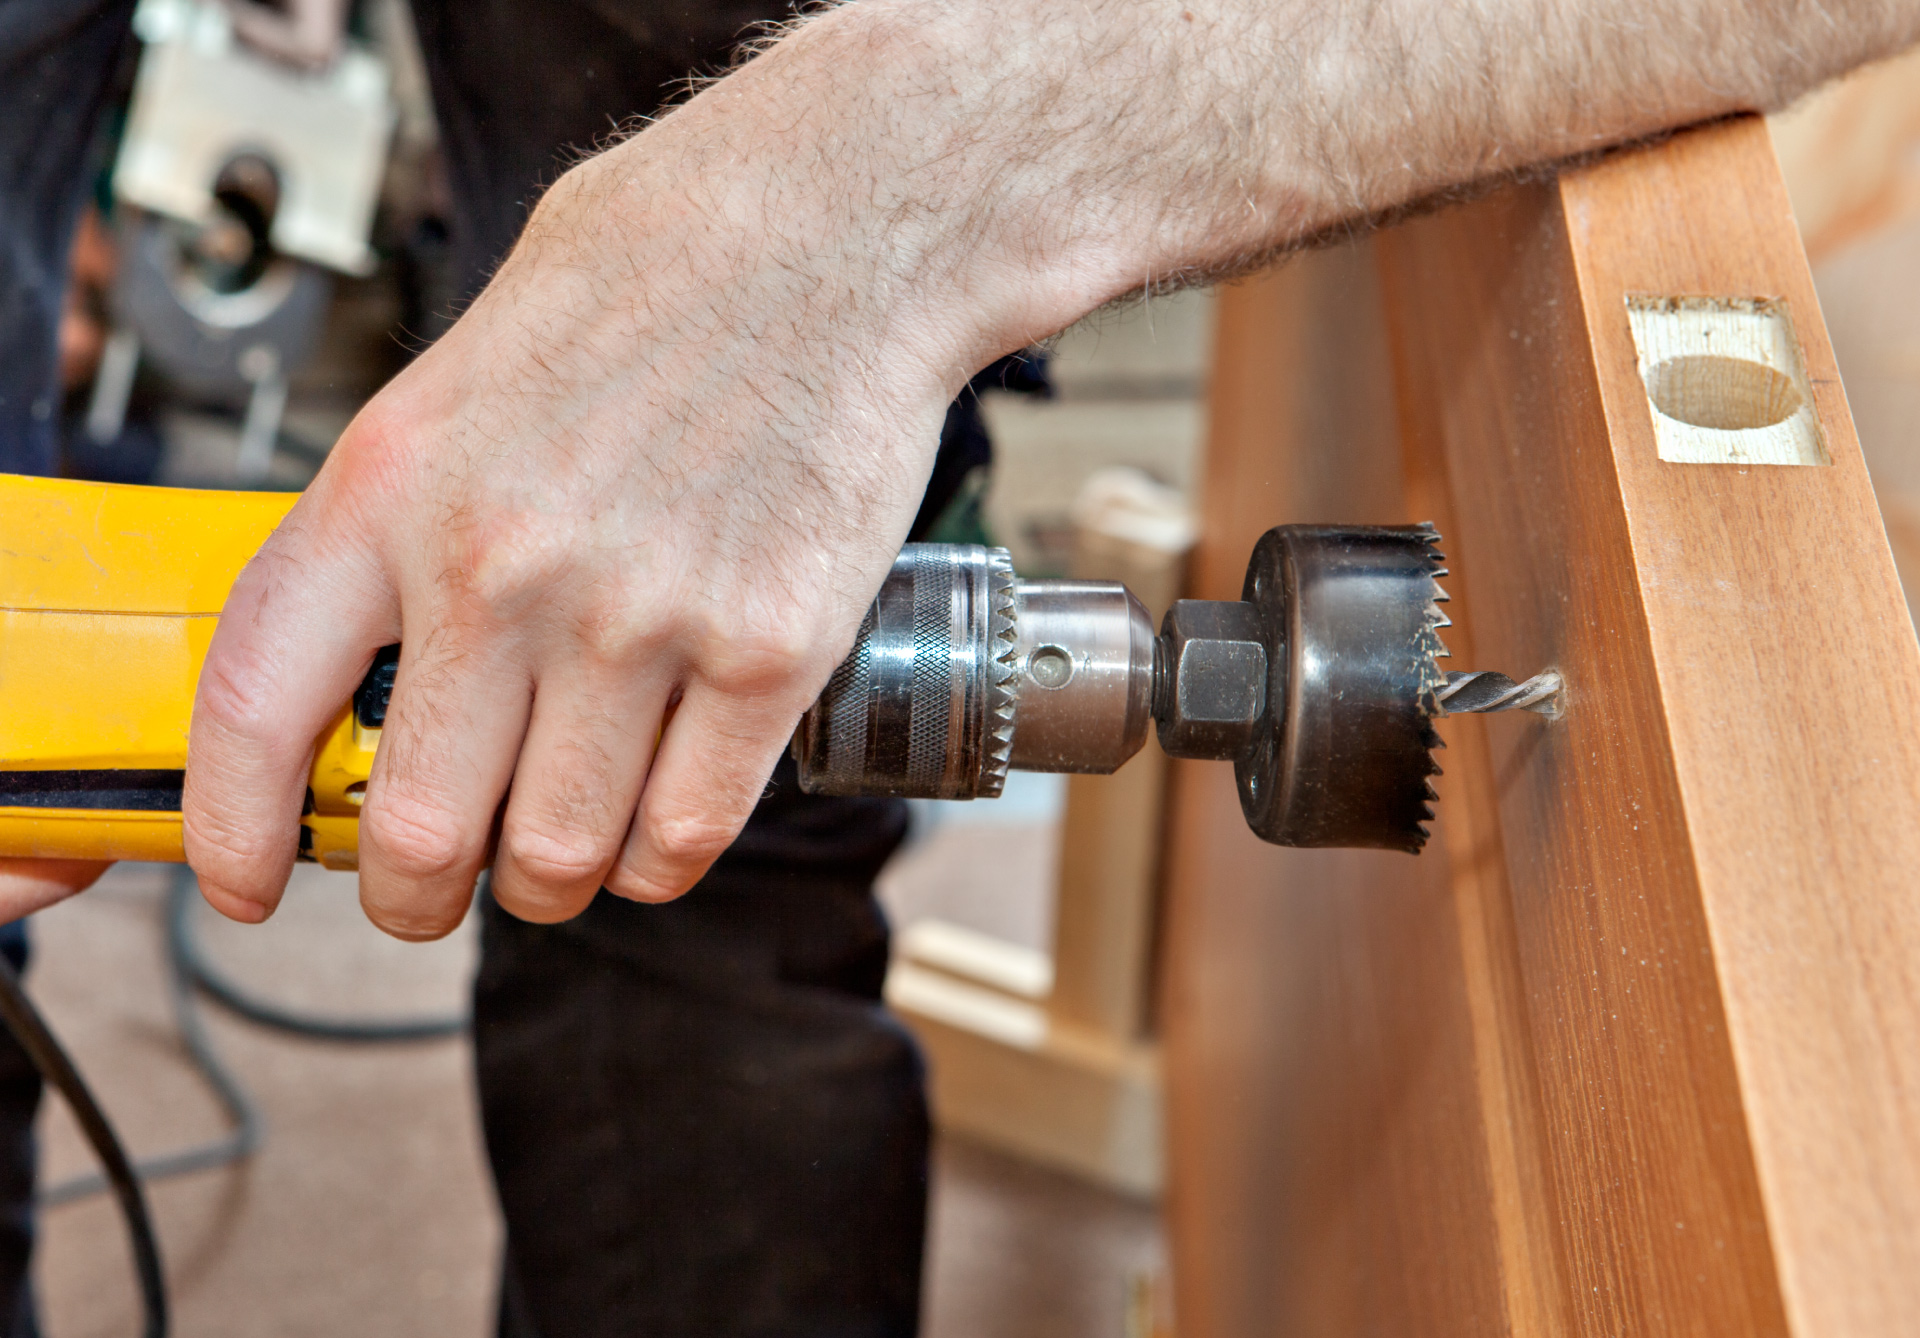 New to door hardware DIY? Read the ultimate guide of what you need to get started.